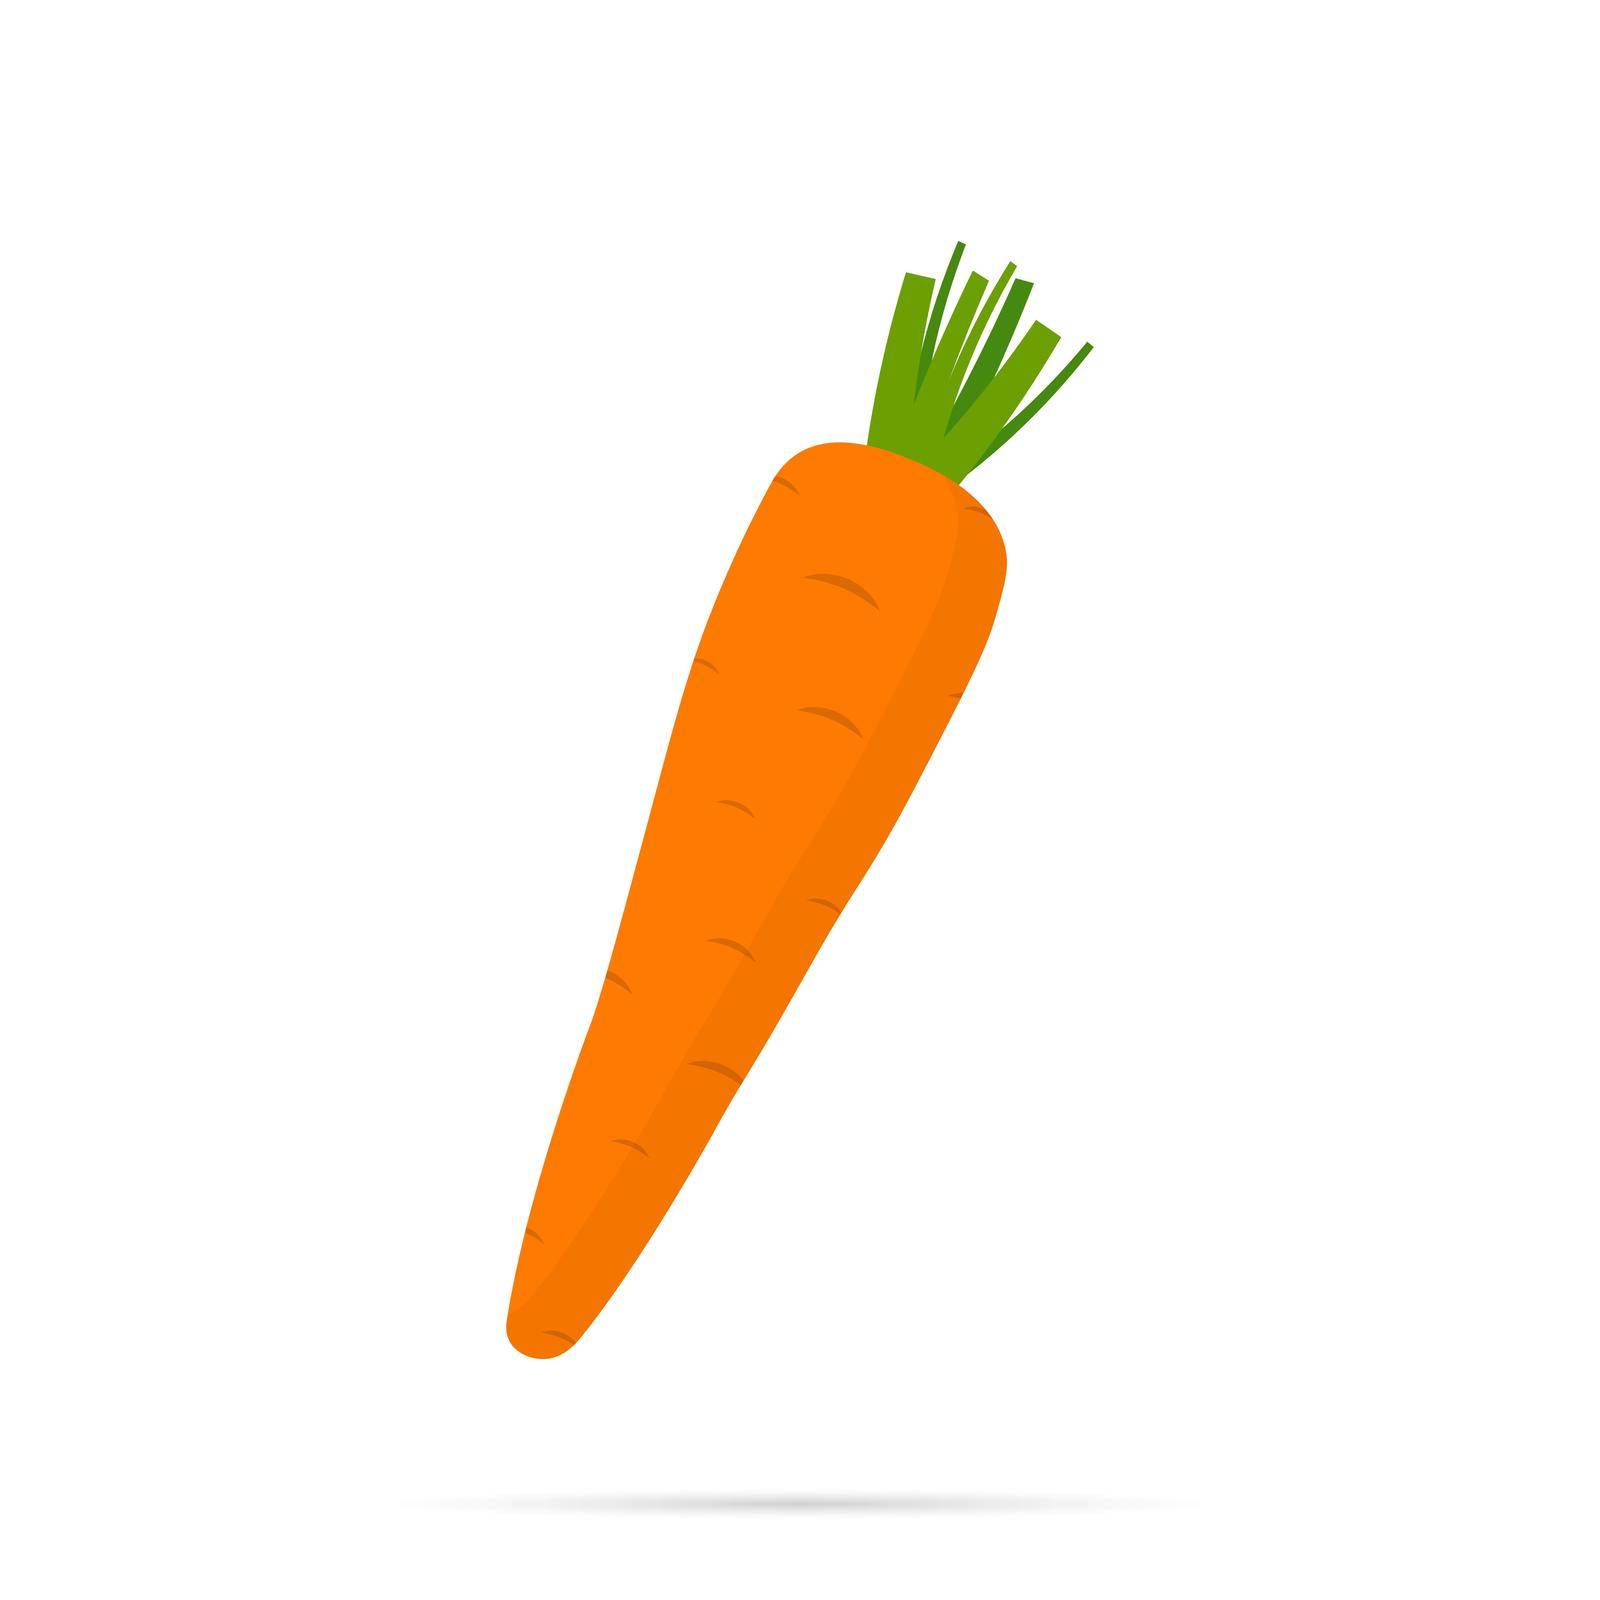 Carrot icon with shadow by misteremil